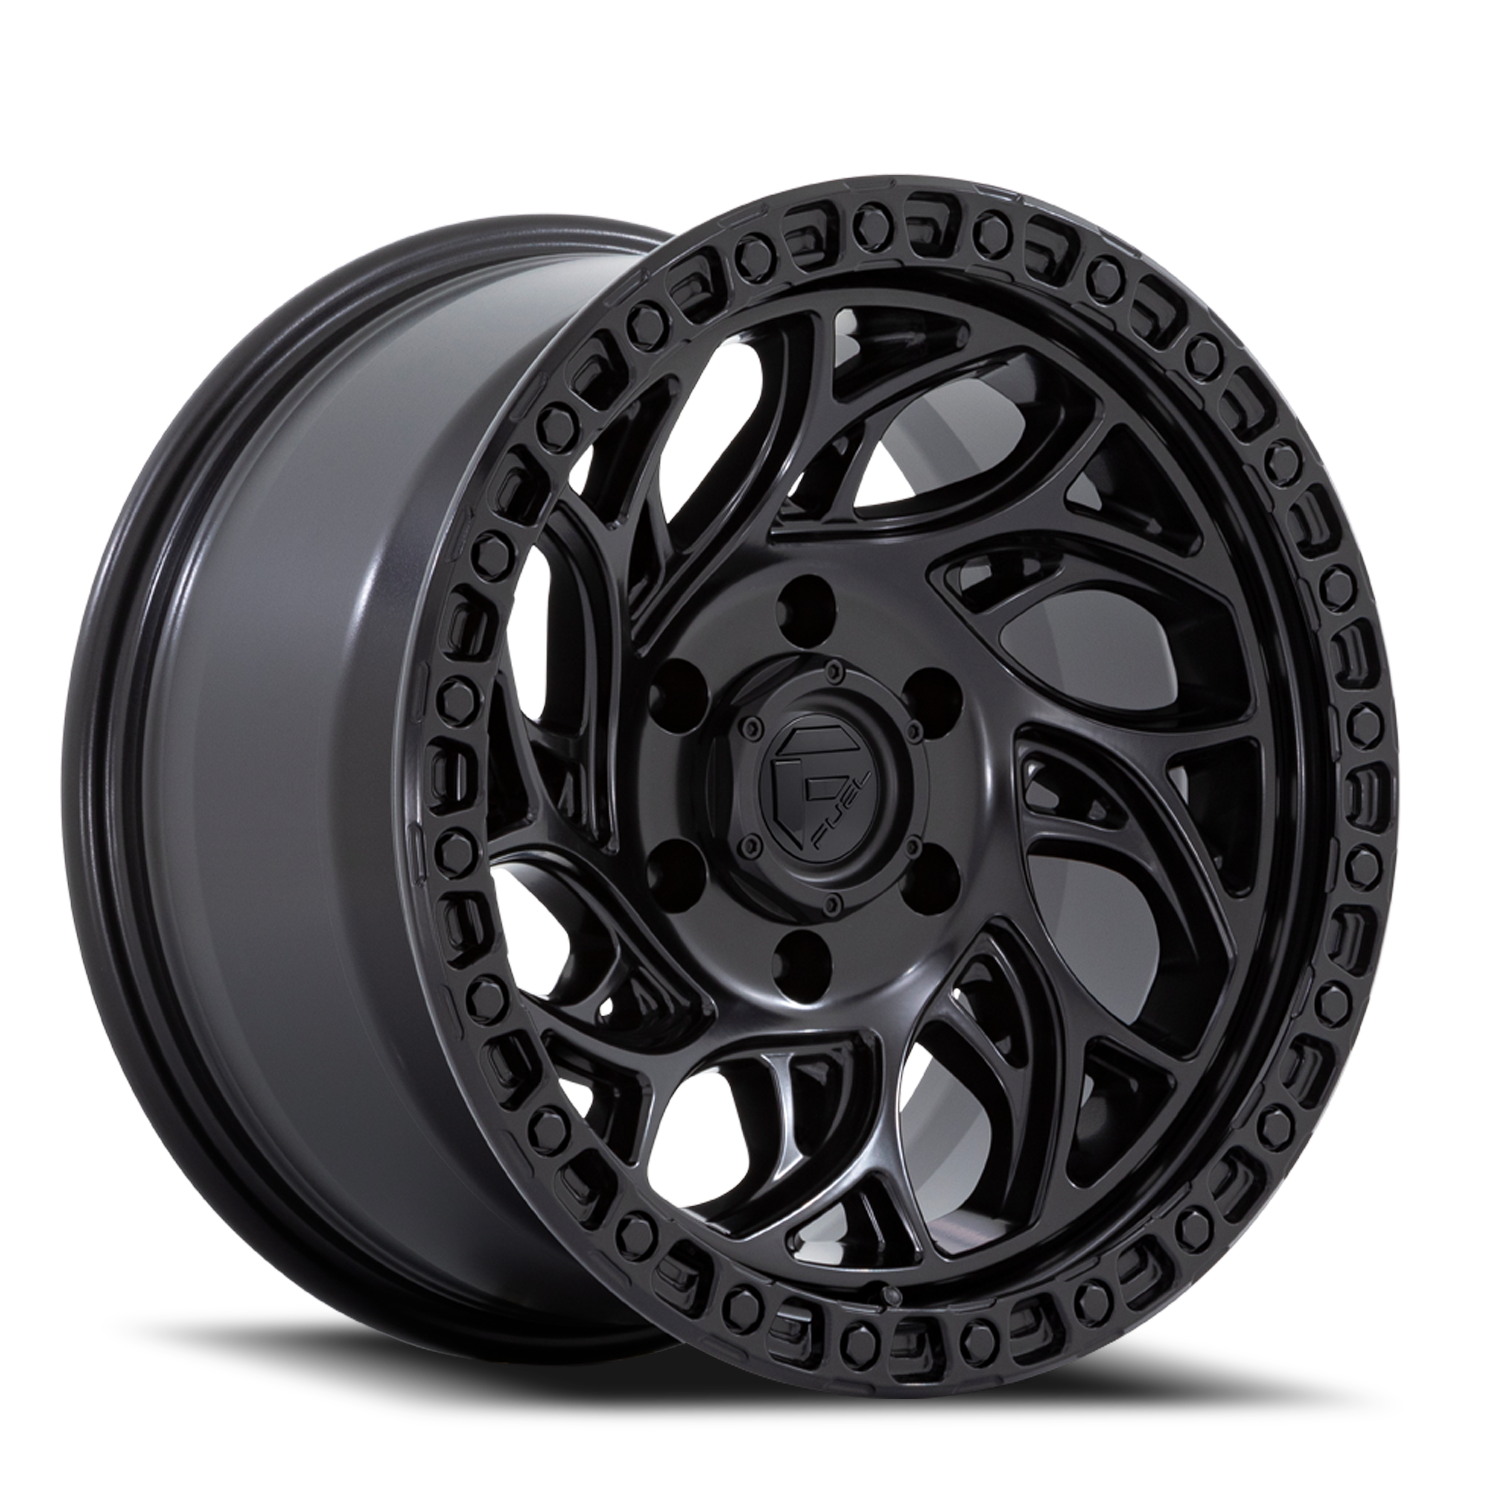 Aluminum Wheels 20X9 Runner OR D852 6 On 135 Blackout 87.1 Bore 1 Offset Fuel Off Road Wheels